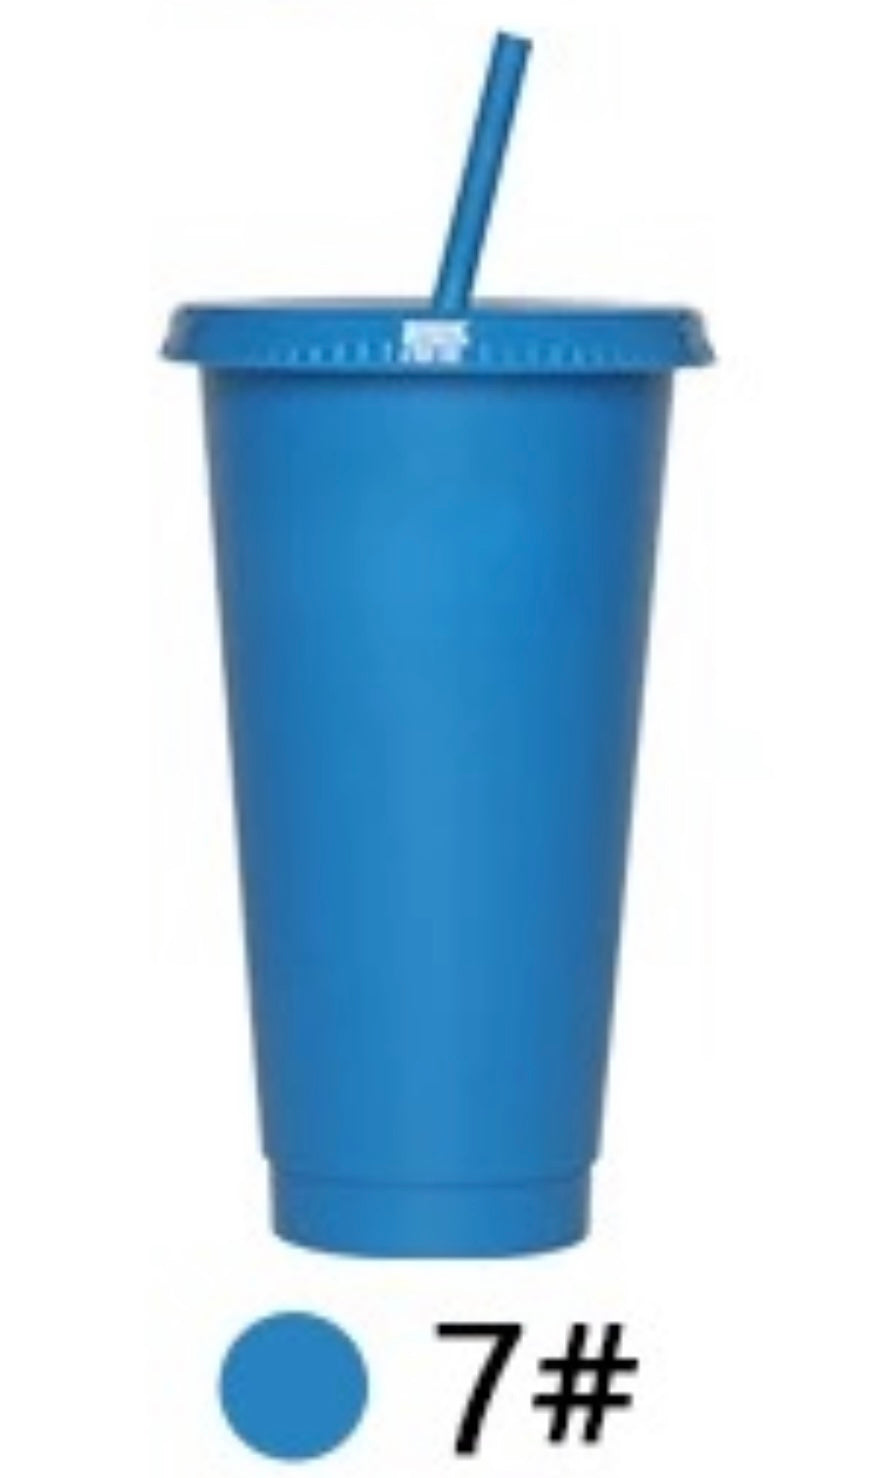 New 24oz Cups